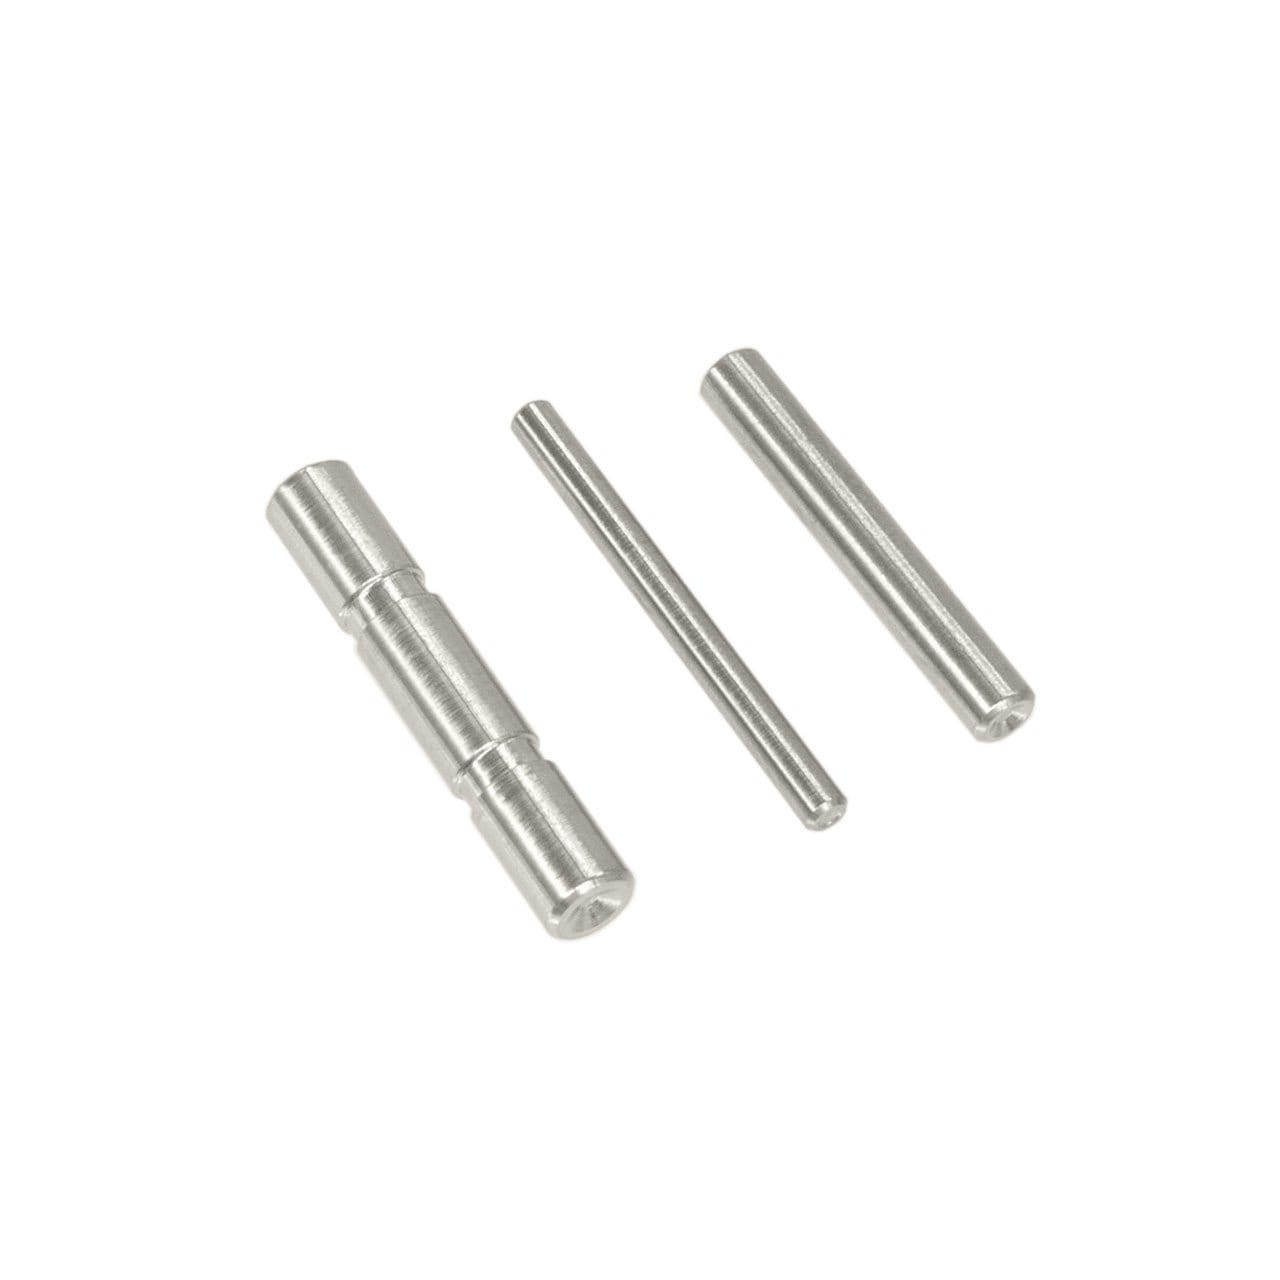 Image of ROOK Tactical Polymer80 Single Stack Dimpled Pin Kit (PF9SS) - Stainless Steel